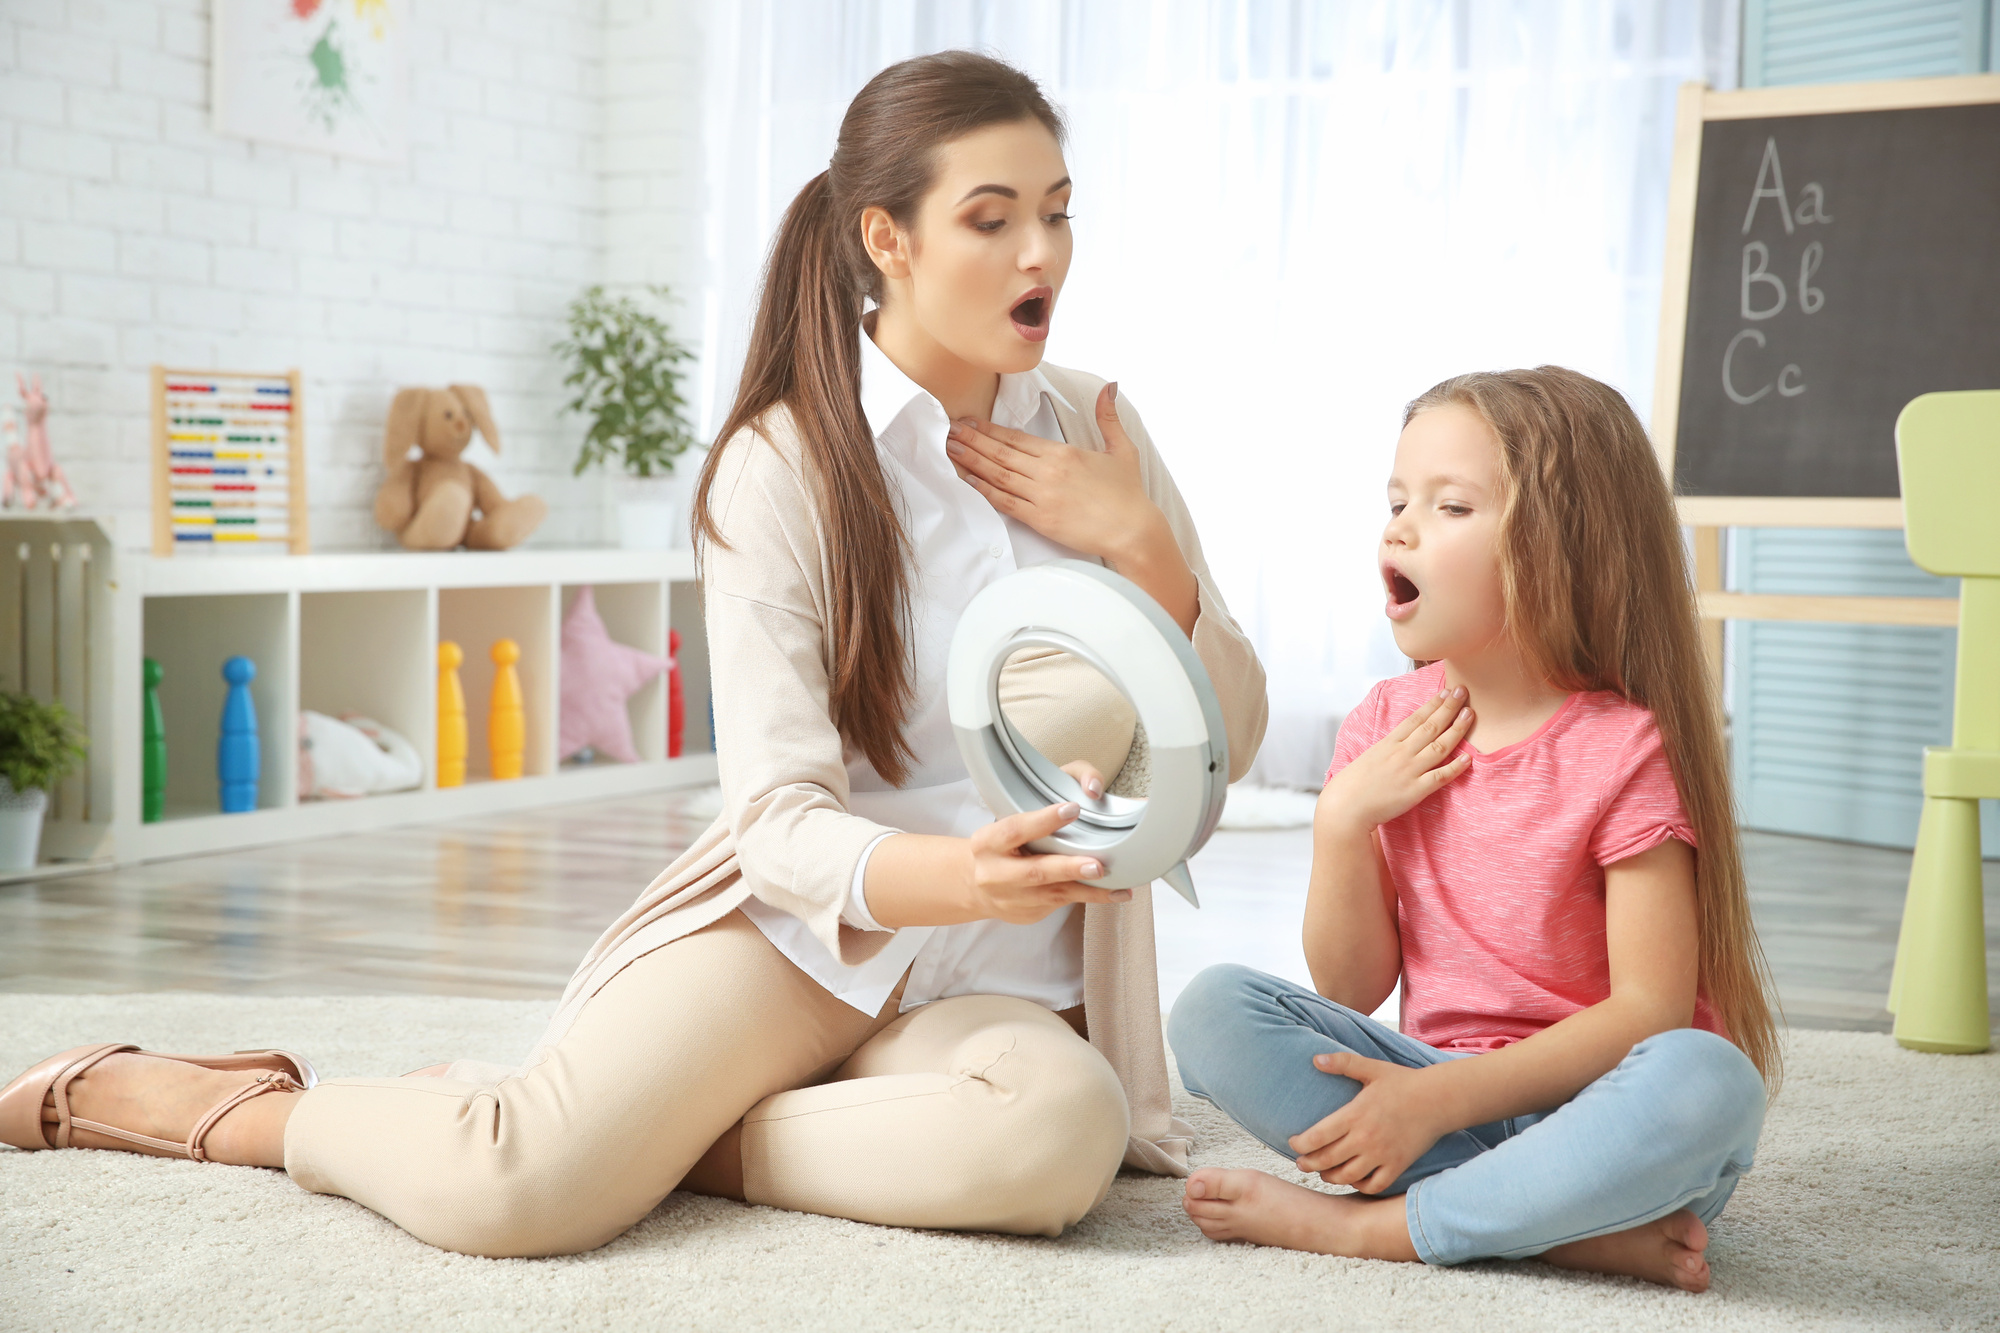 Speech Language Therapy vs. Tutoring: What’s the Difference?